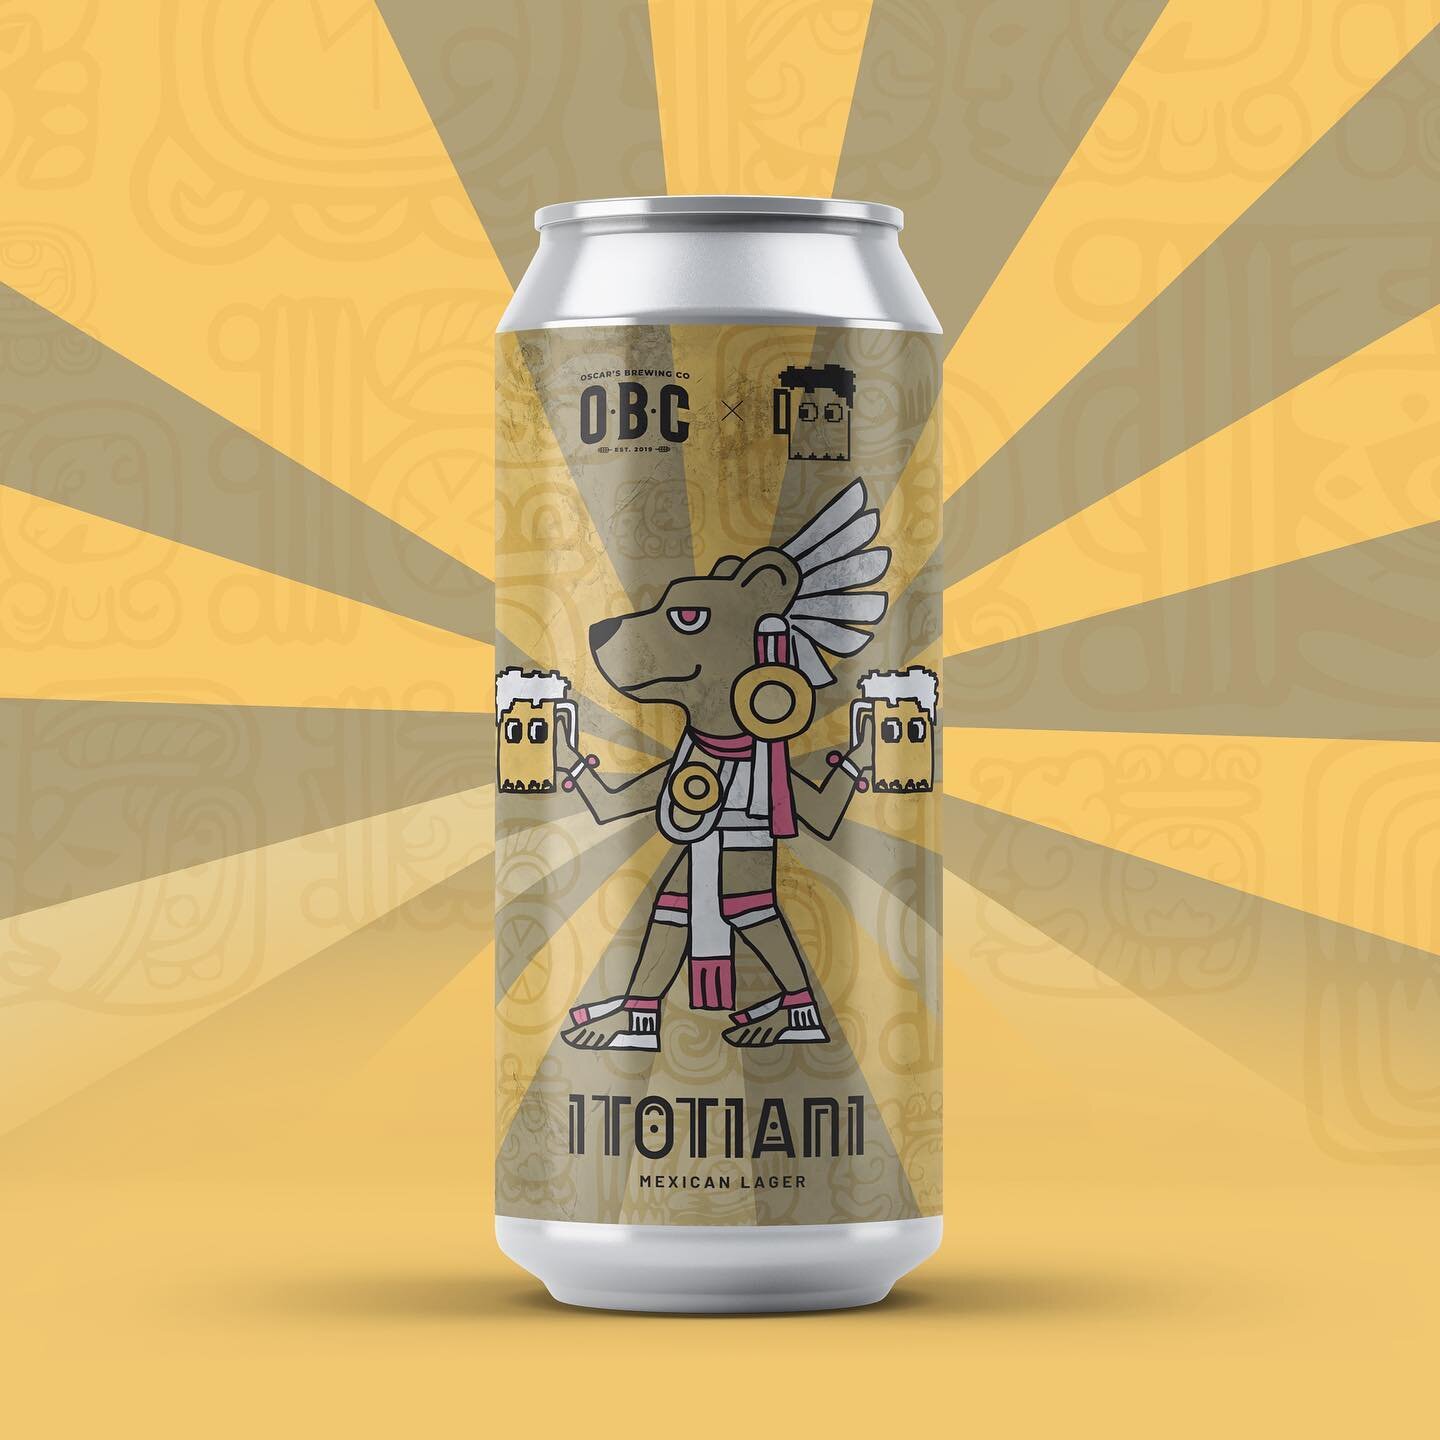 Itotiani Mexican Lager label design for @oscarsbrewingco x @8bitbrewingcompany collab #🐻🍺